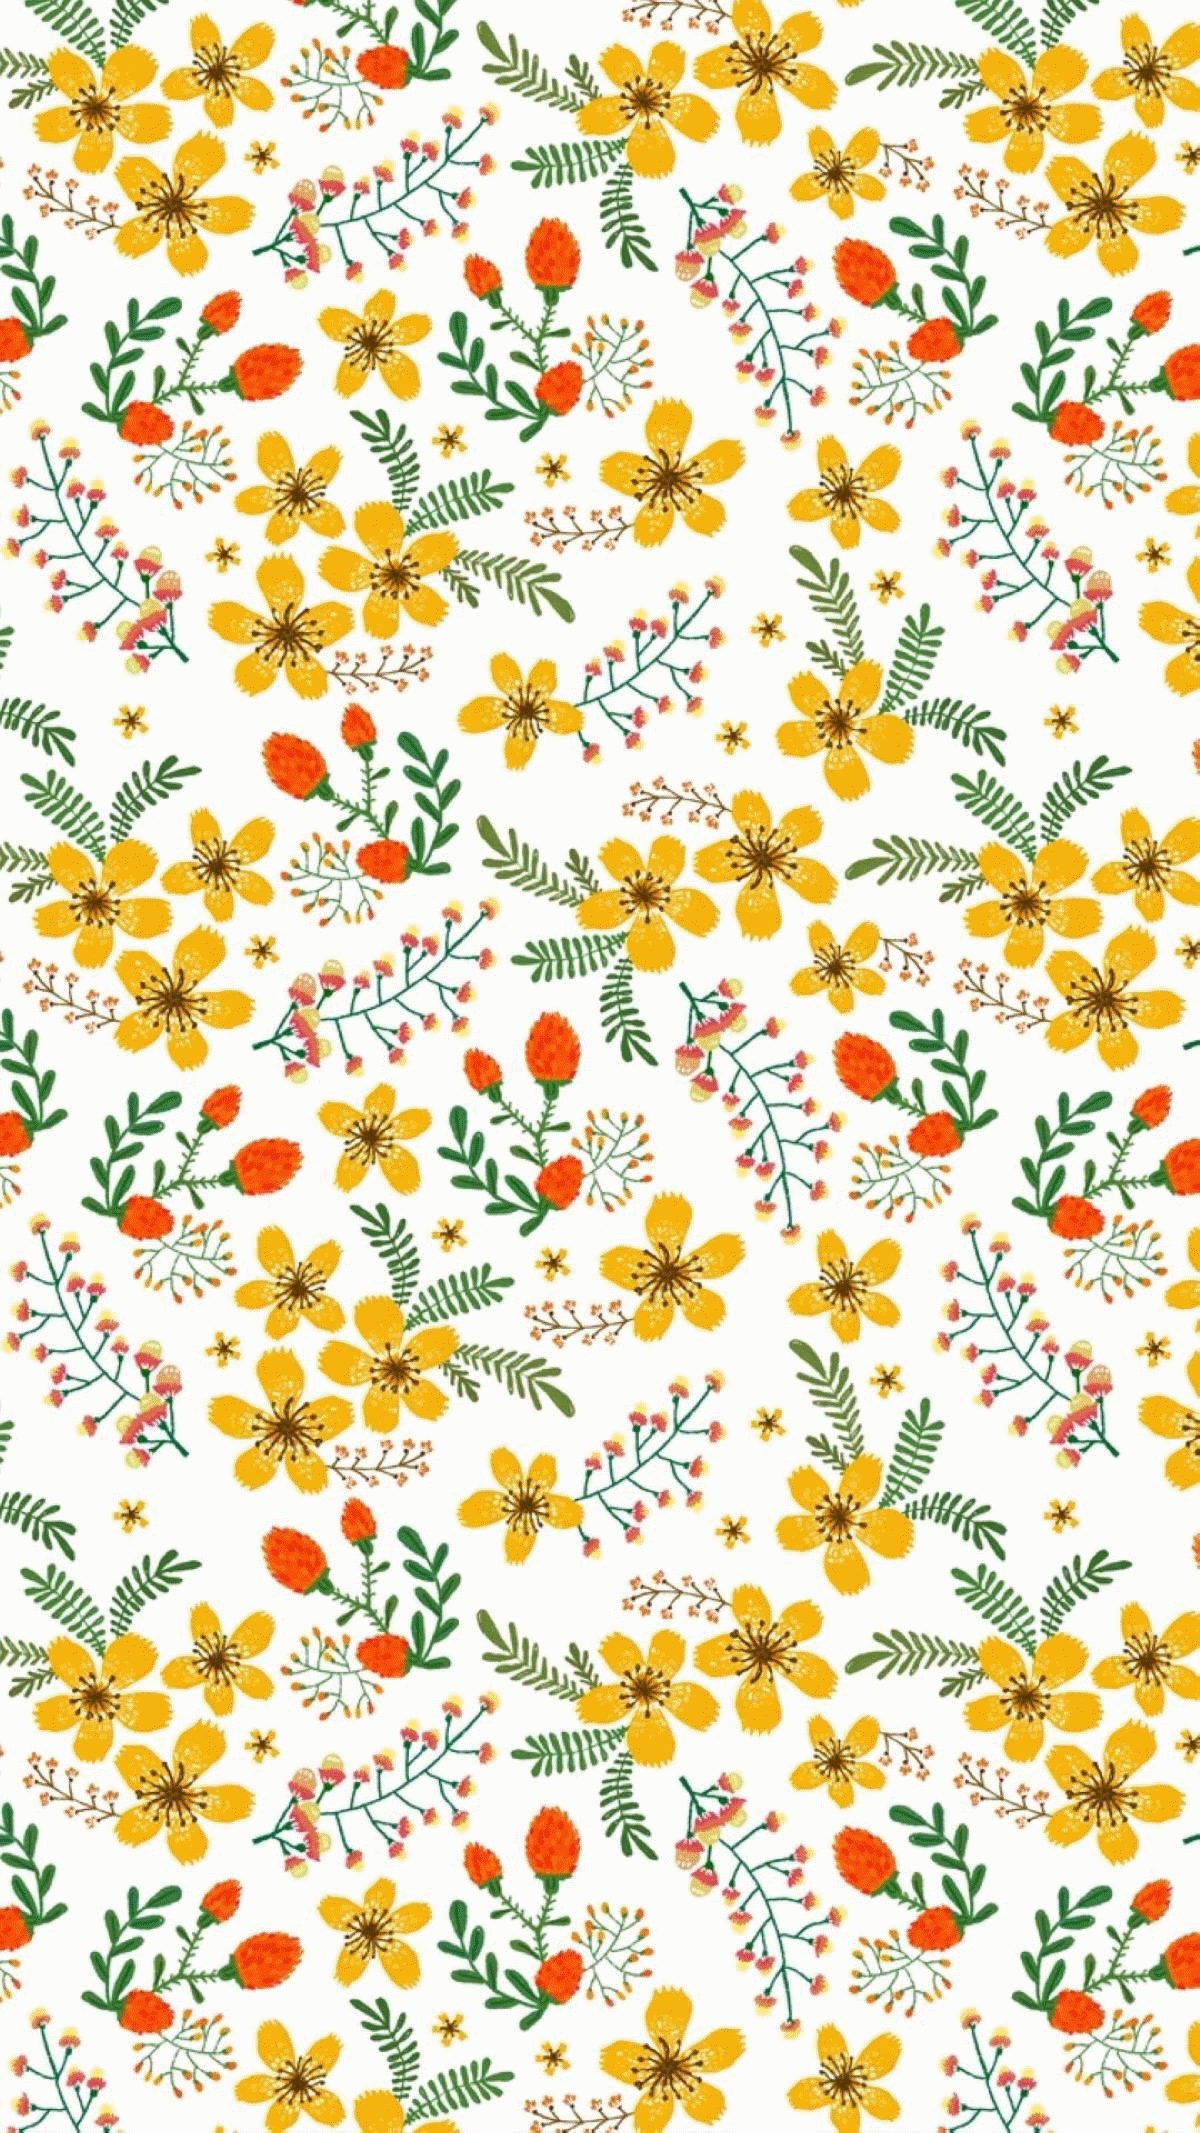 floral pattern design in 2020 with images iphone medium